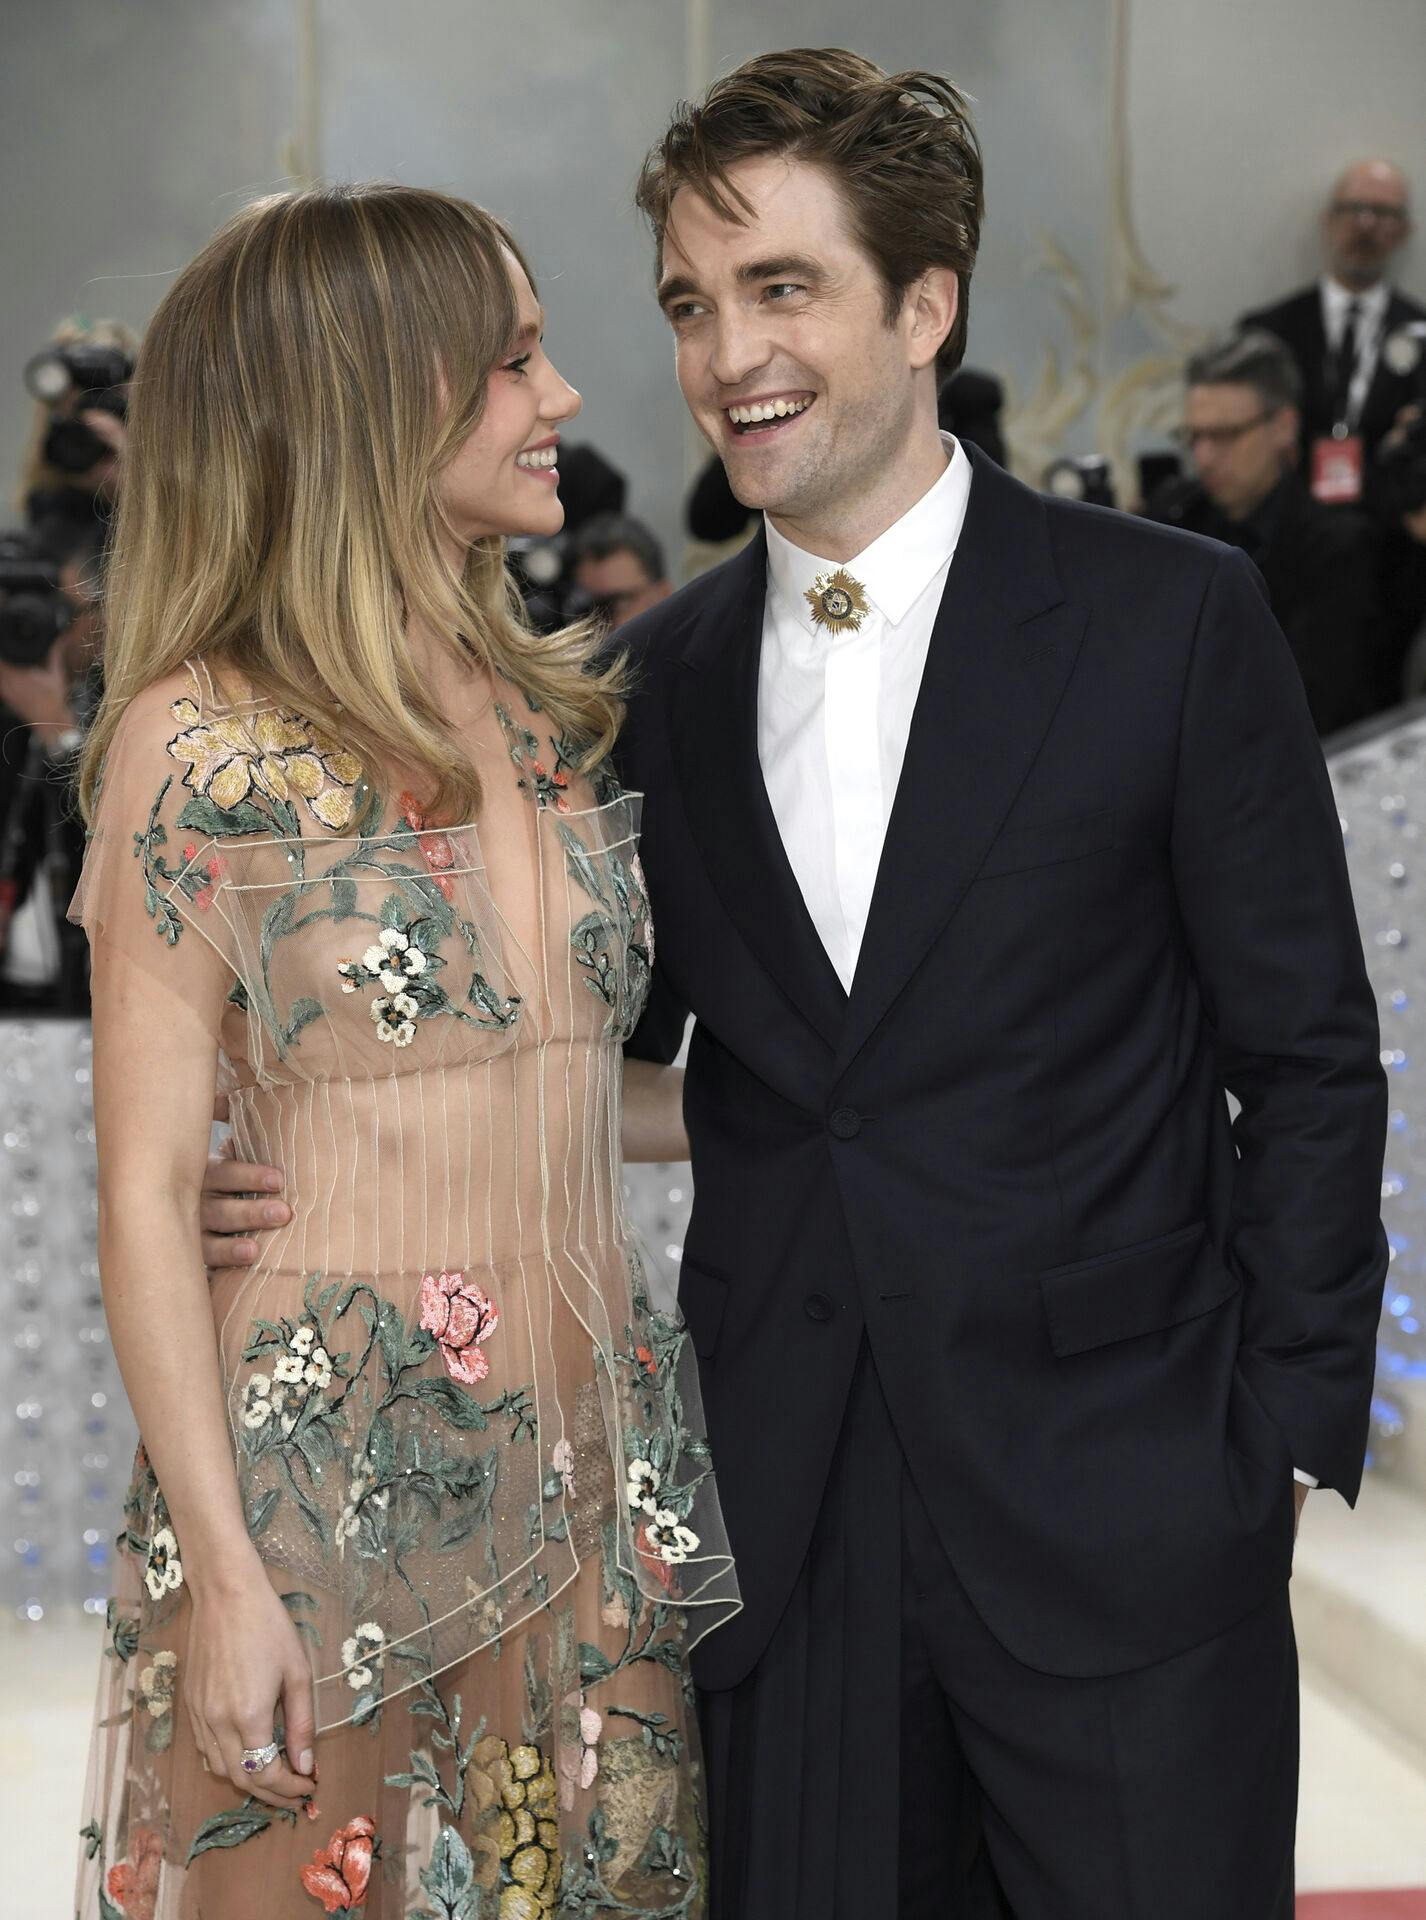 Suki Waterhouse, left, and Robert Pattinson attend The Metropolitan Museum of Art's Costume Institute benefit gala celebrating the opening of the "Karl Lagerfeld: A Line of Beauty" exhibition on Monday, May 1, 2023, in New York. (Photo by Evan Agostini/Invision/AP)